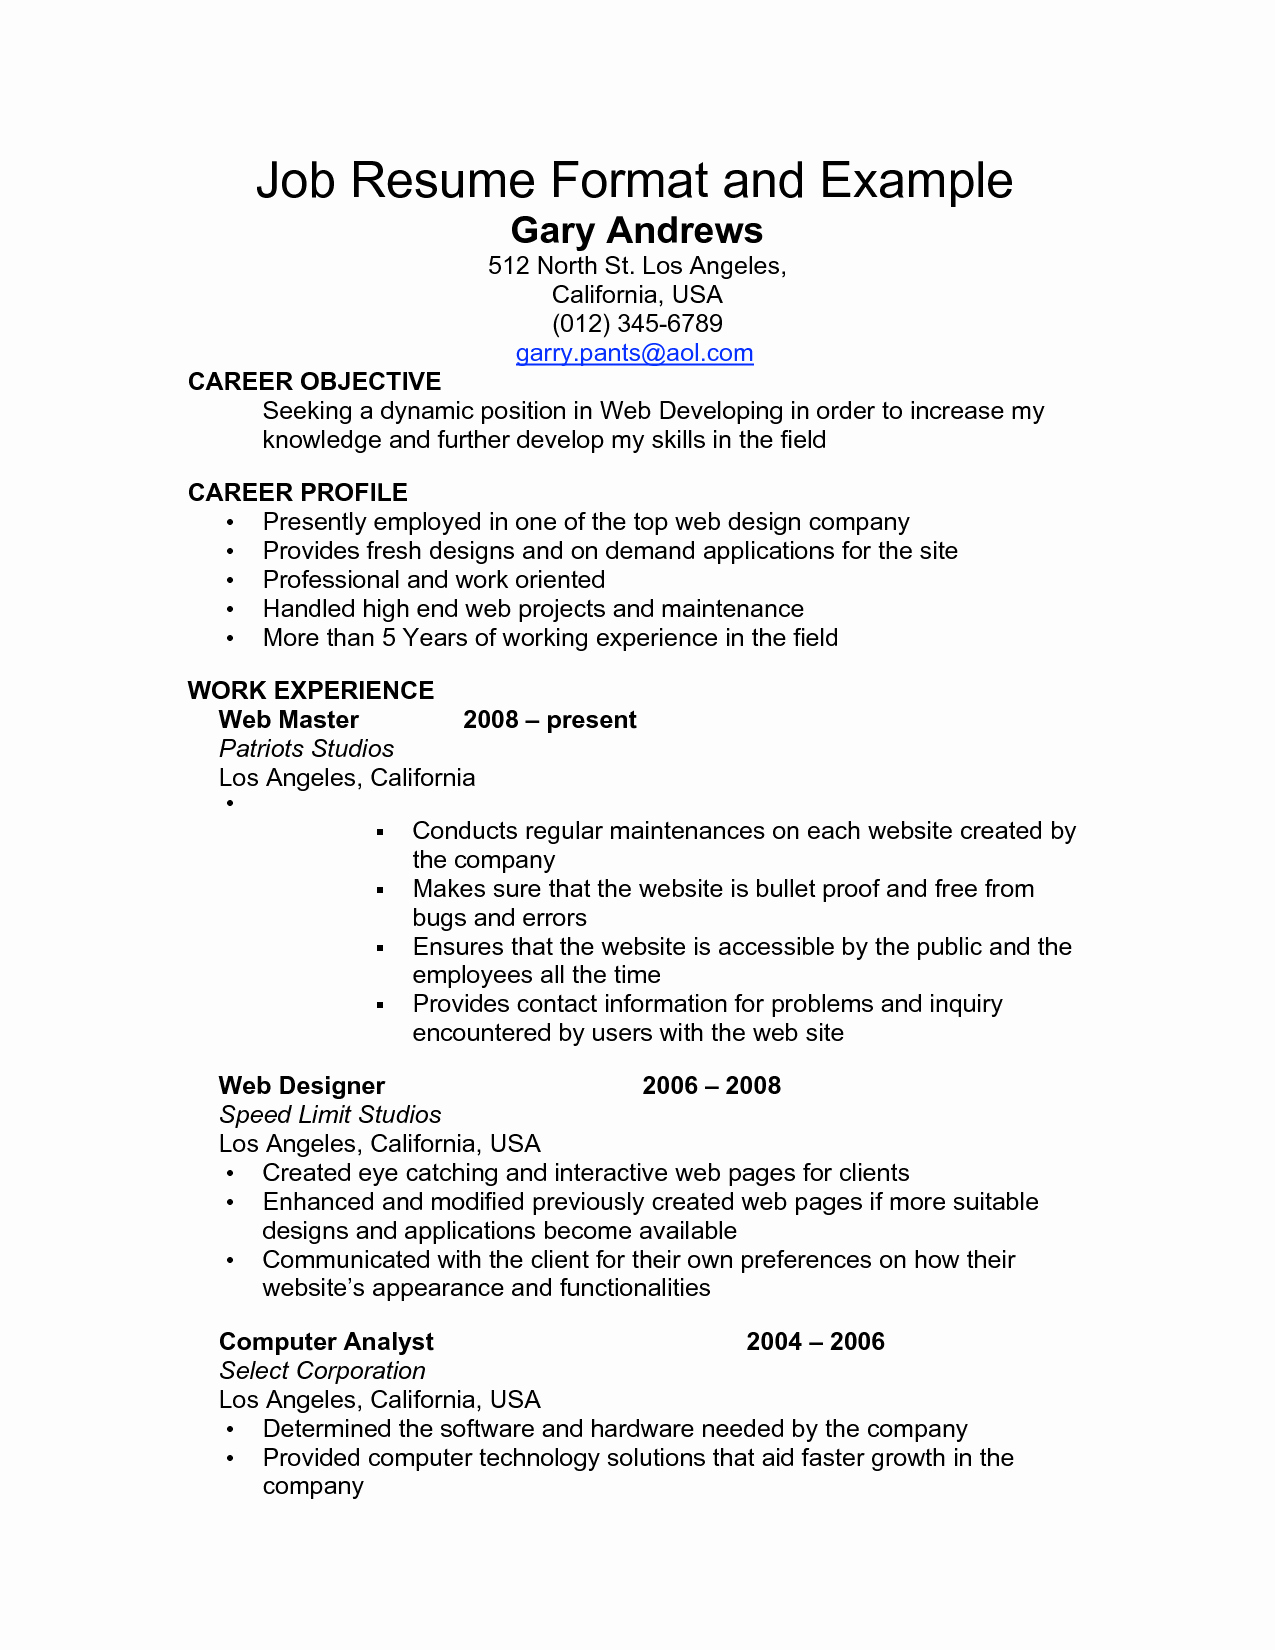 Resume Sample for Employment